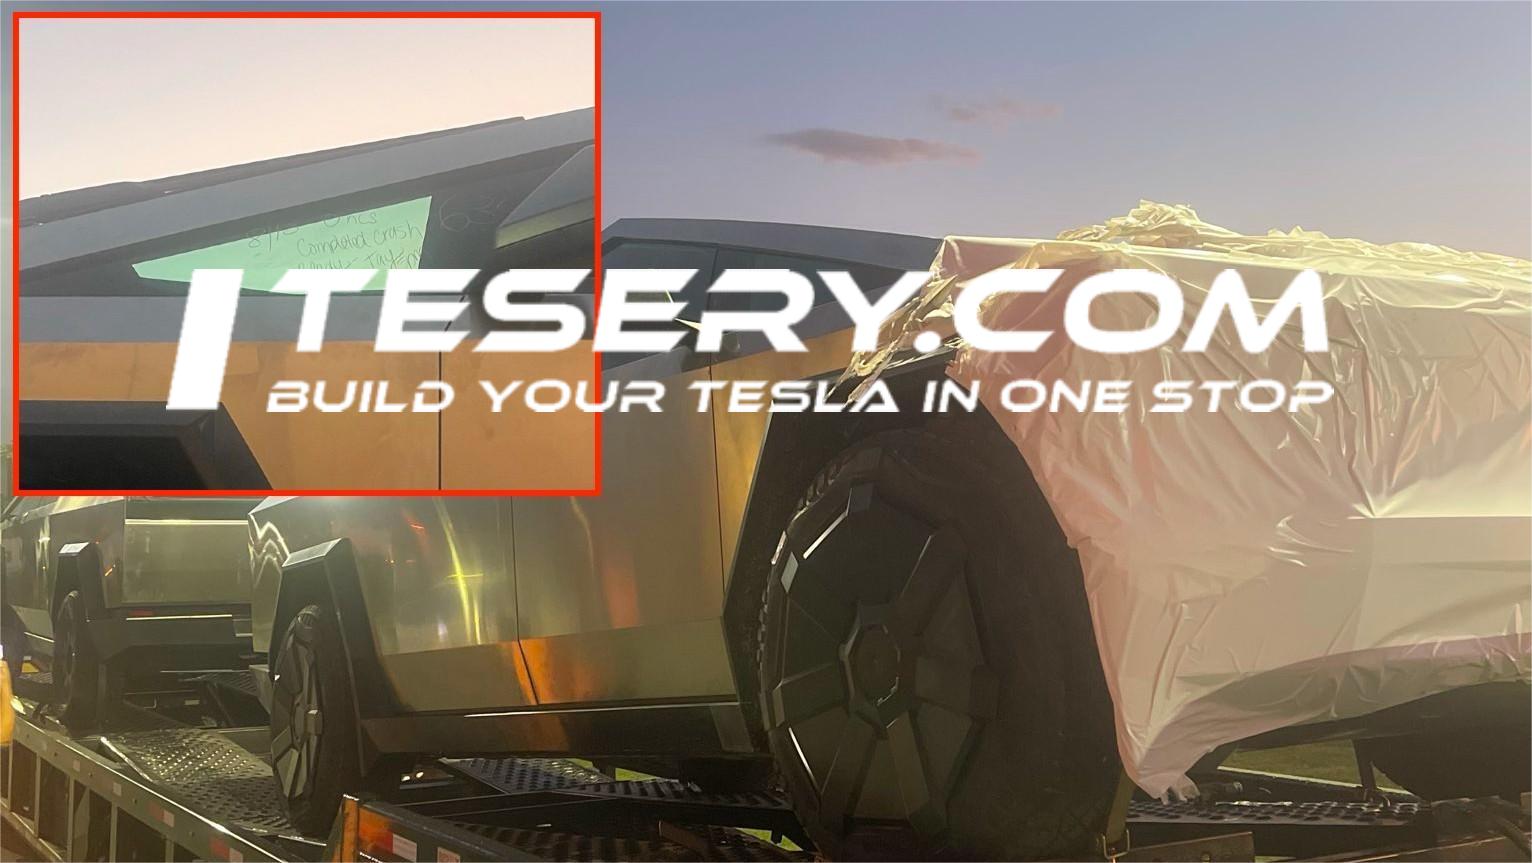 Tesla's Cybertruck Takes Center Stage in Crash Test Speculations - Tesery Official Store